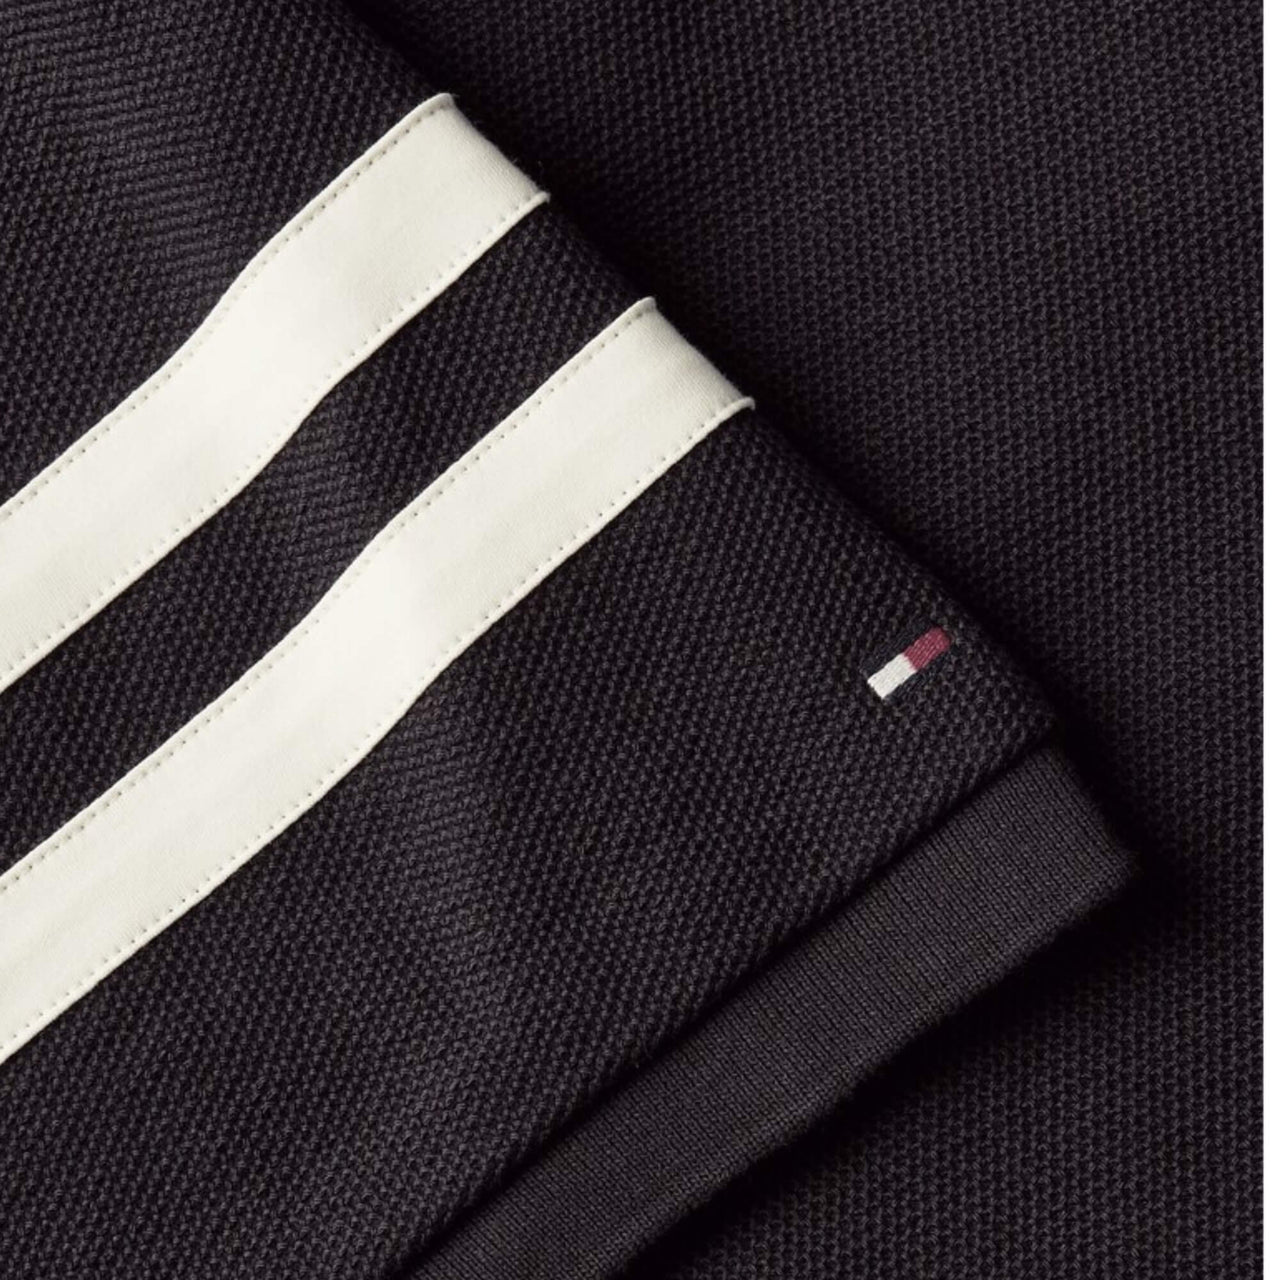 Polos Tommy Hilfiger Hombre Monotype Placement Archive